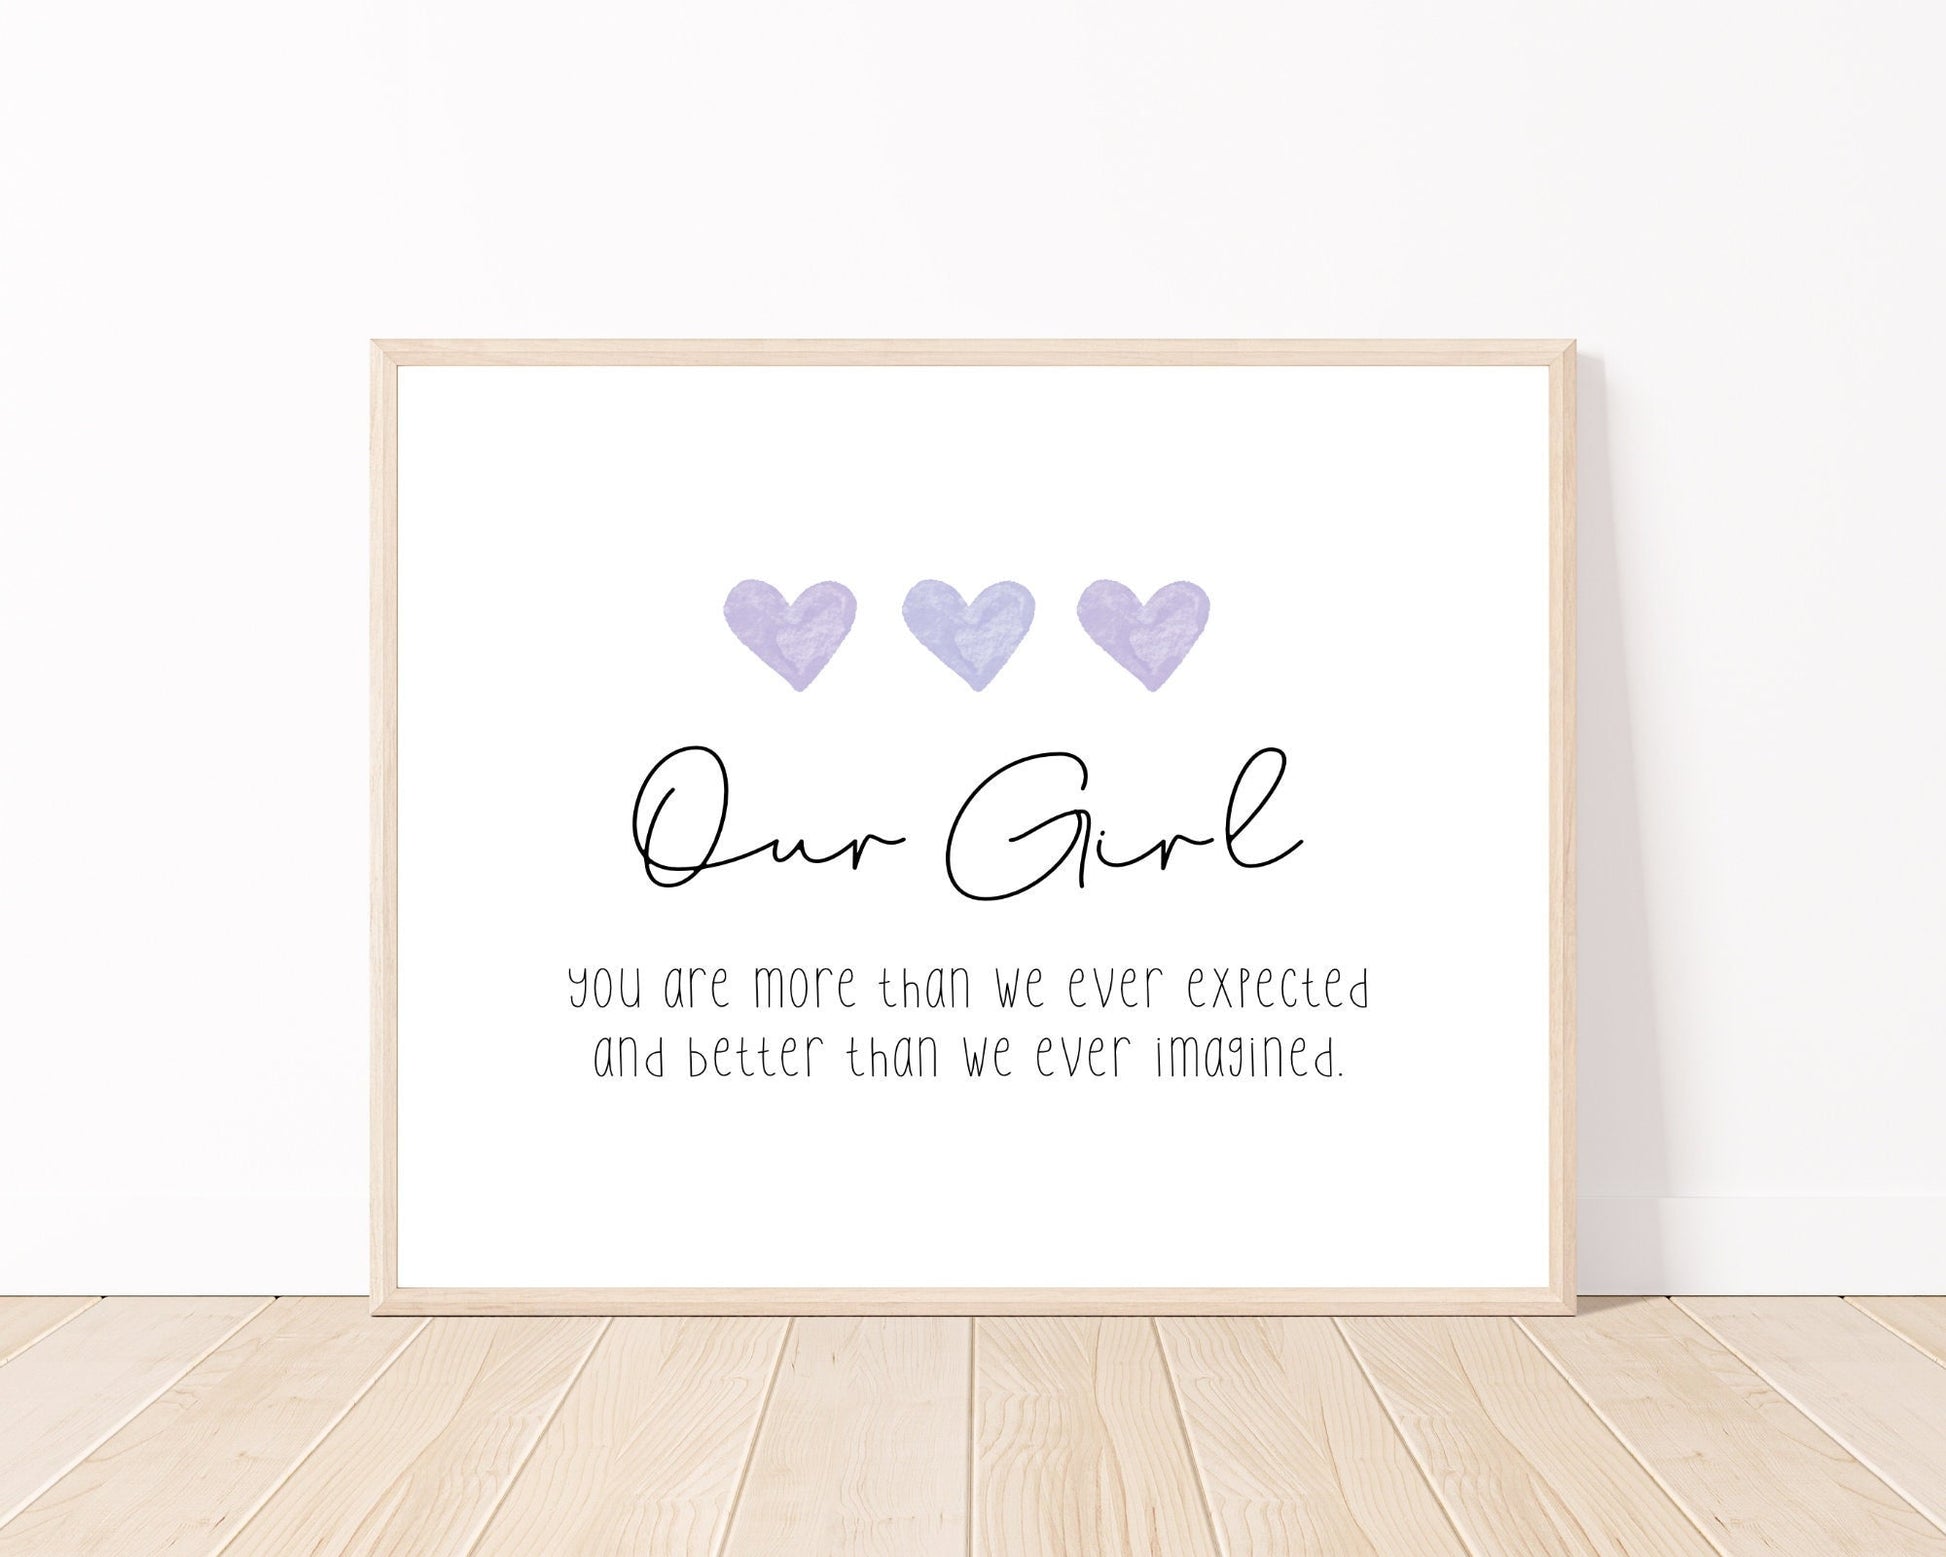 A little girl’s graphic showing three purple blue hearts with a piece of writing below that says: Our girl, you are more than we ever expected, and better than we ever imagined.